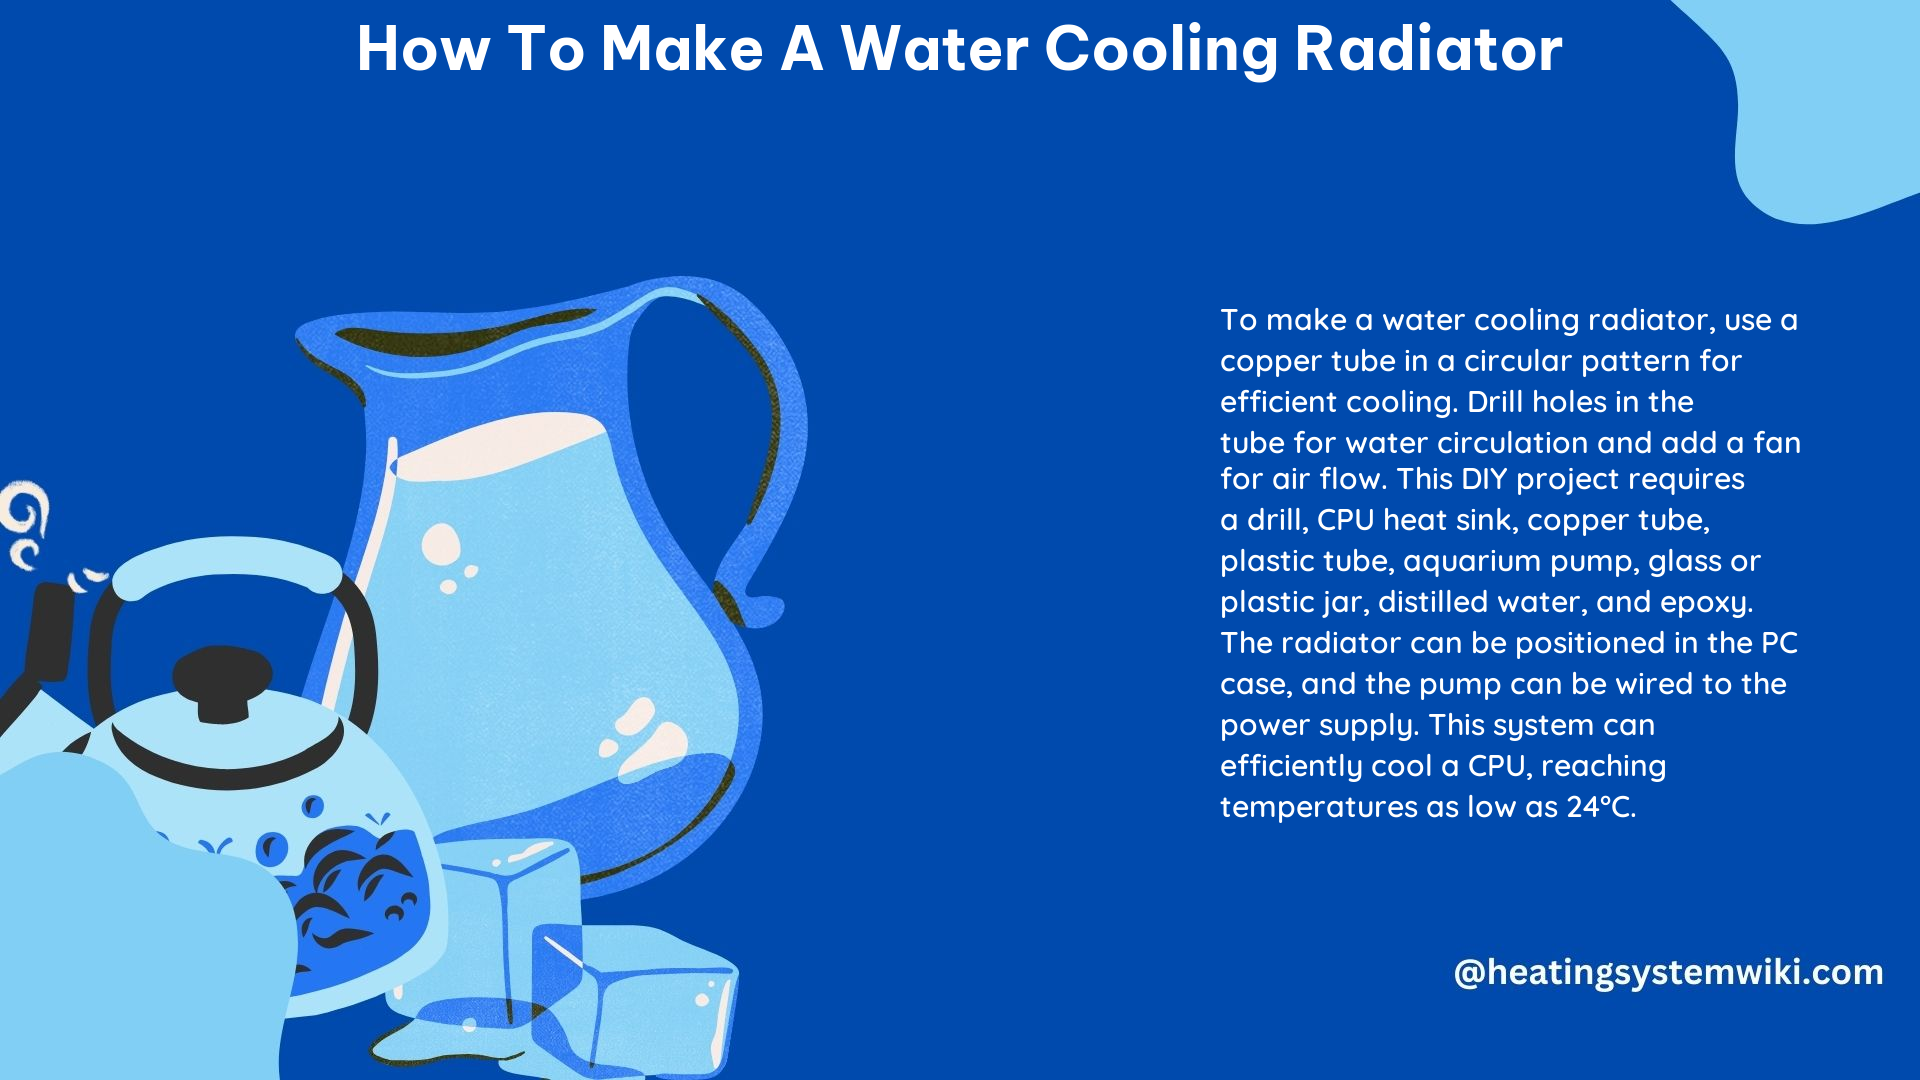 How to Make a Water Cooling Radiator